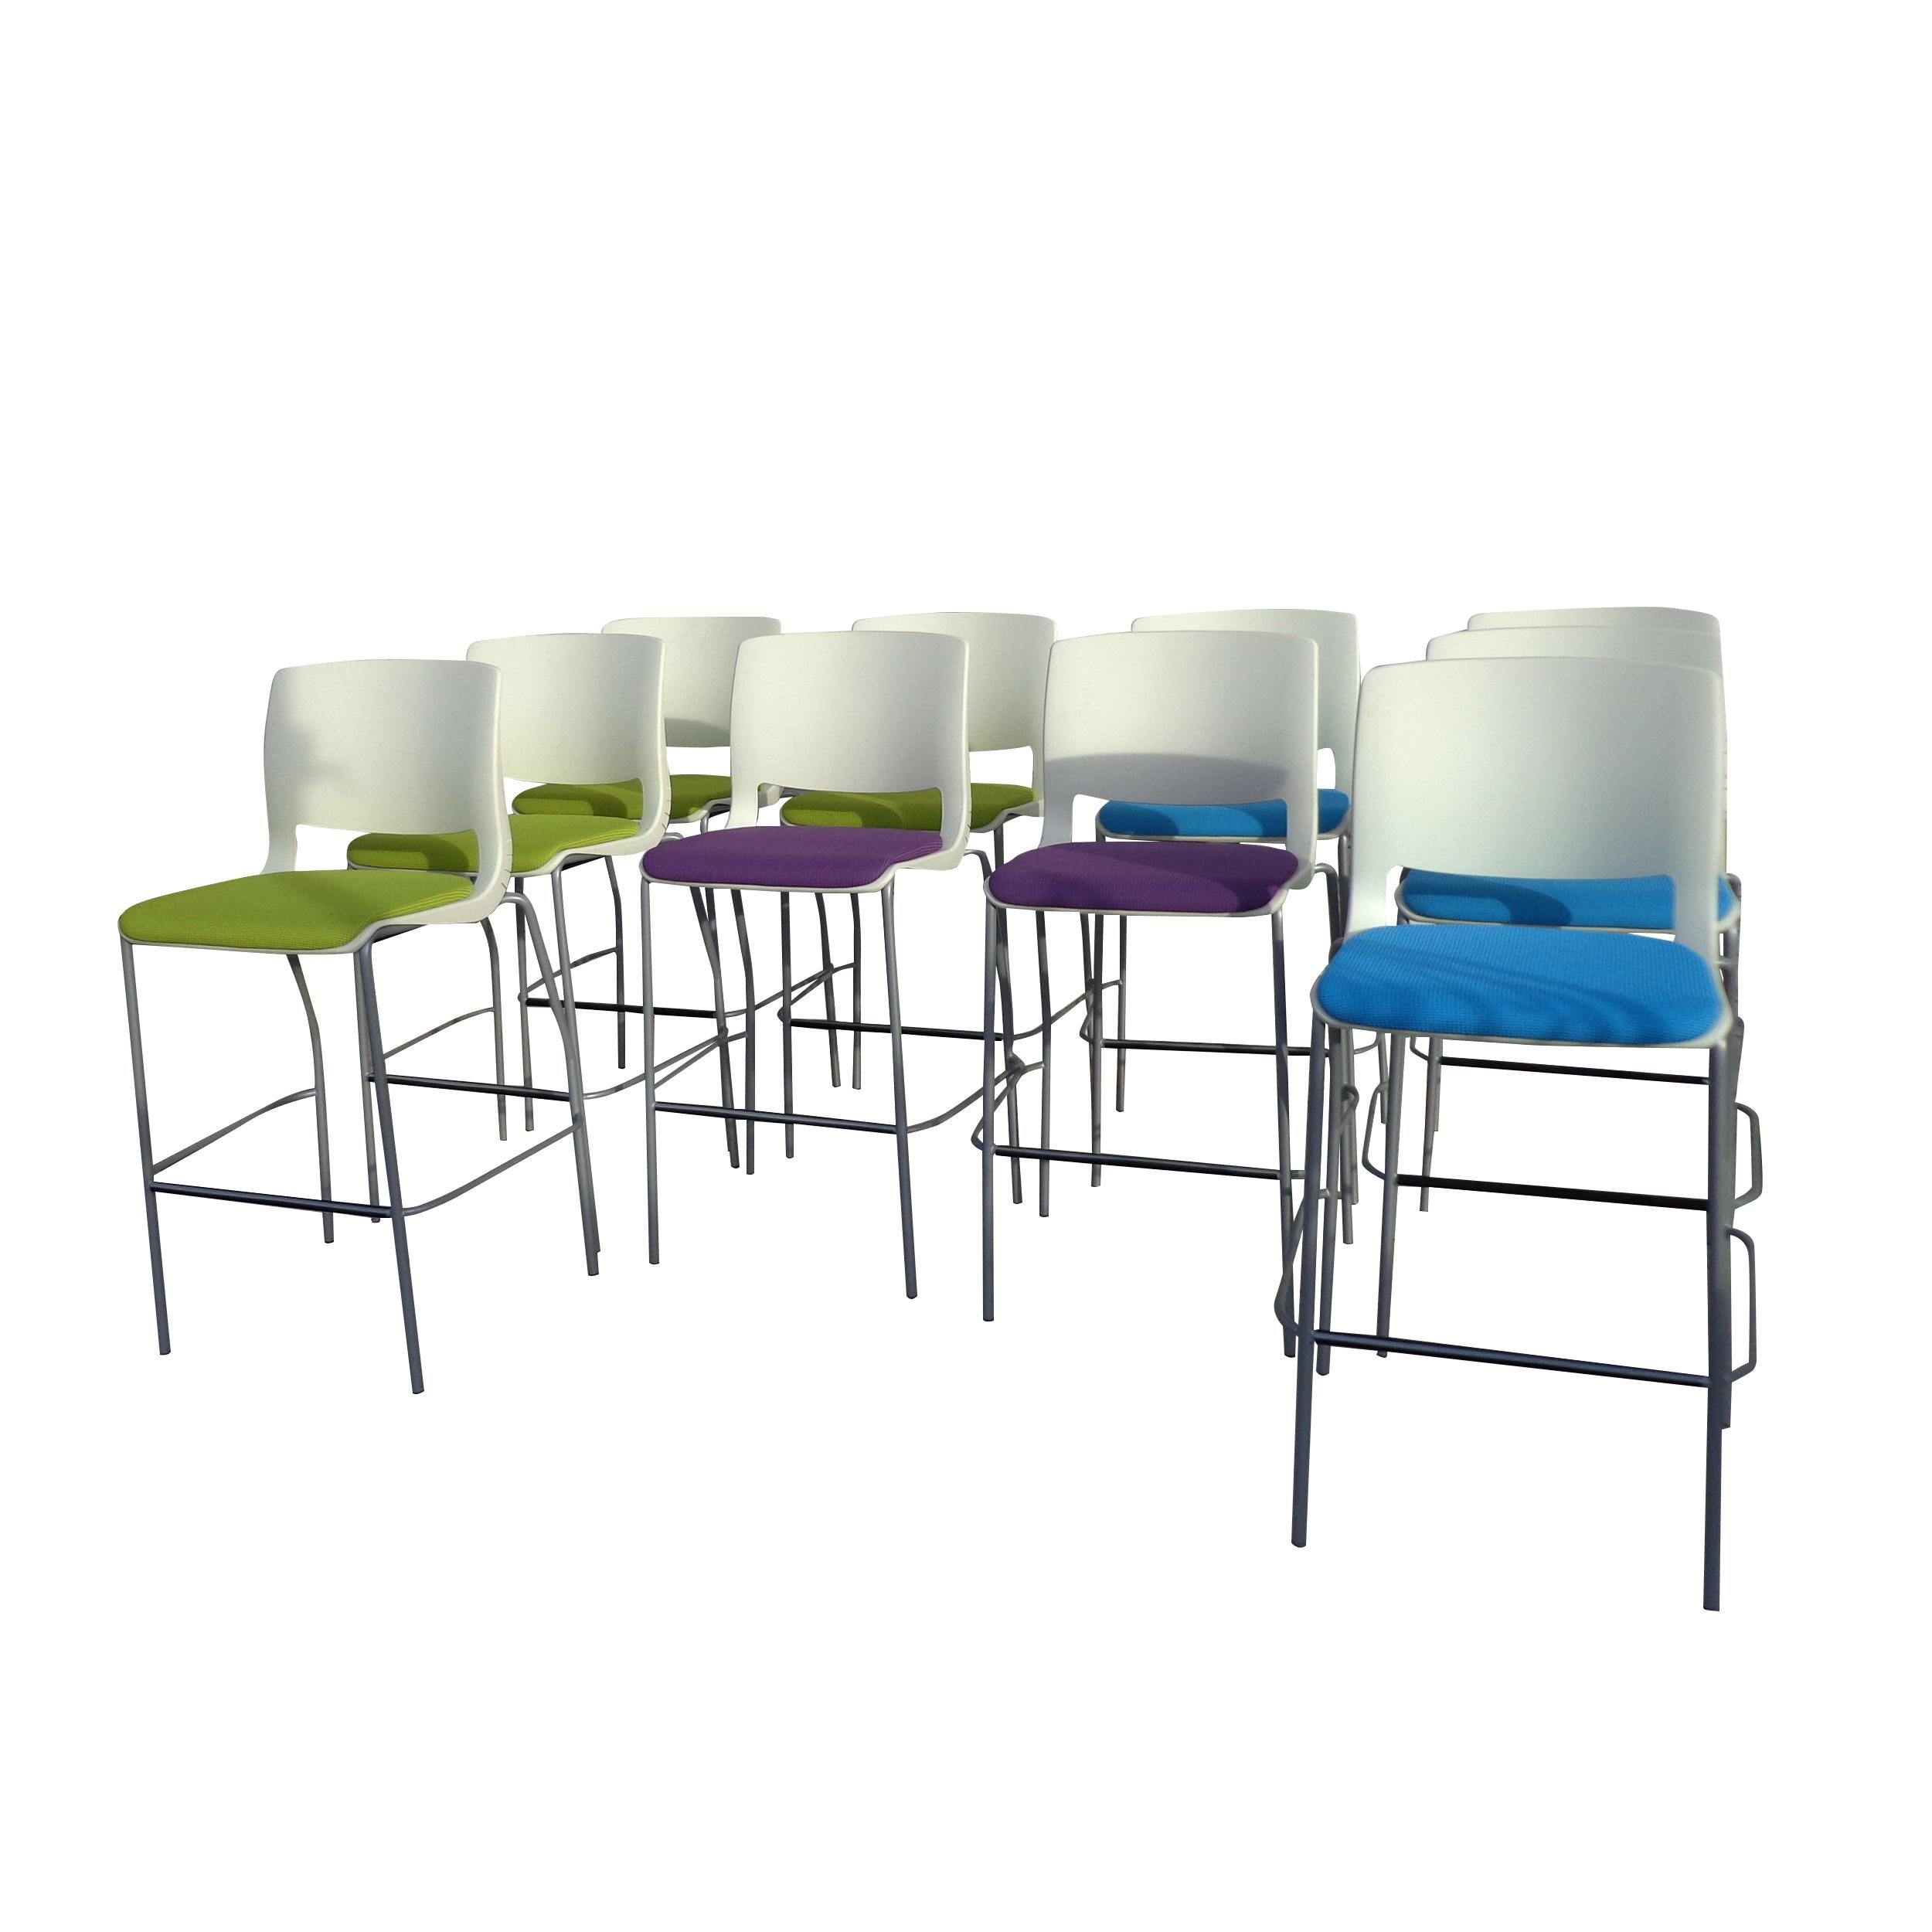 1 Teknion Variable Stool by Alessandro Piretti In Good Condition For Sale In Pasadena, TX